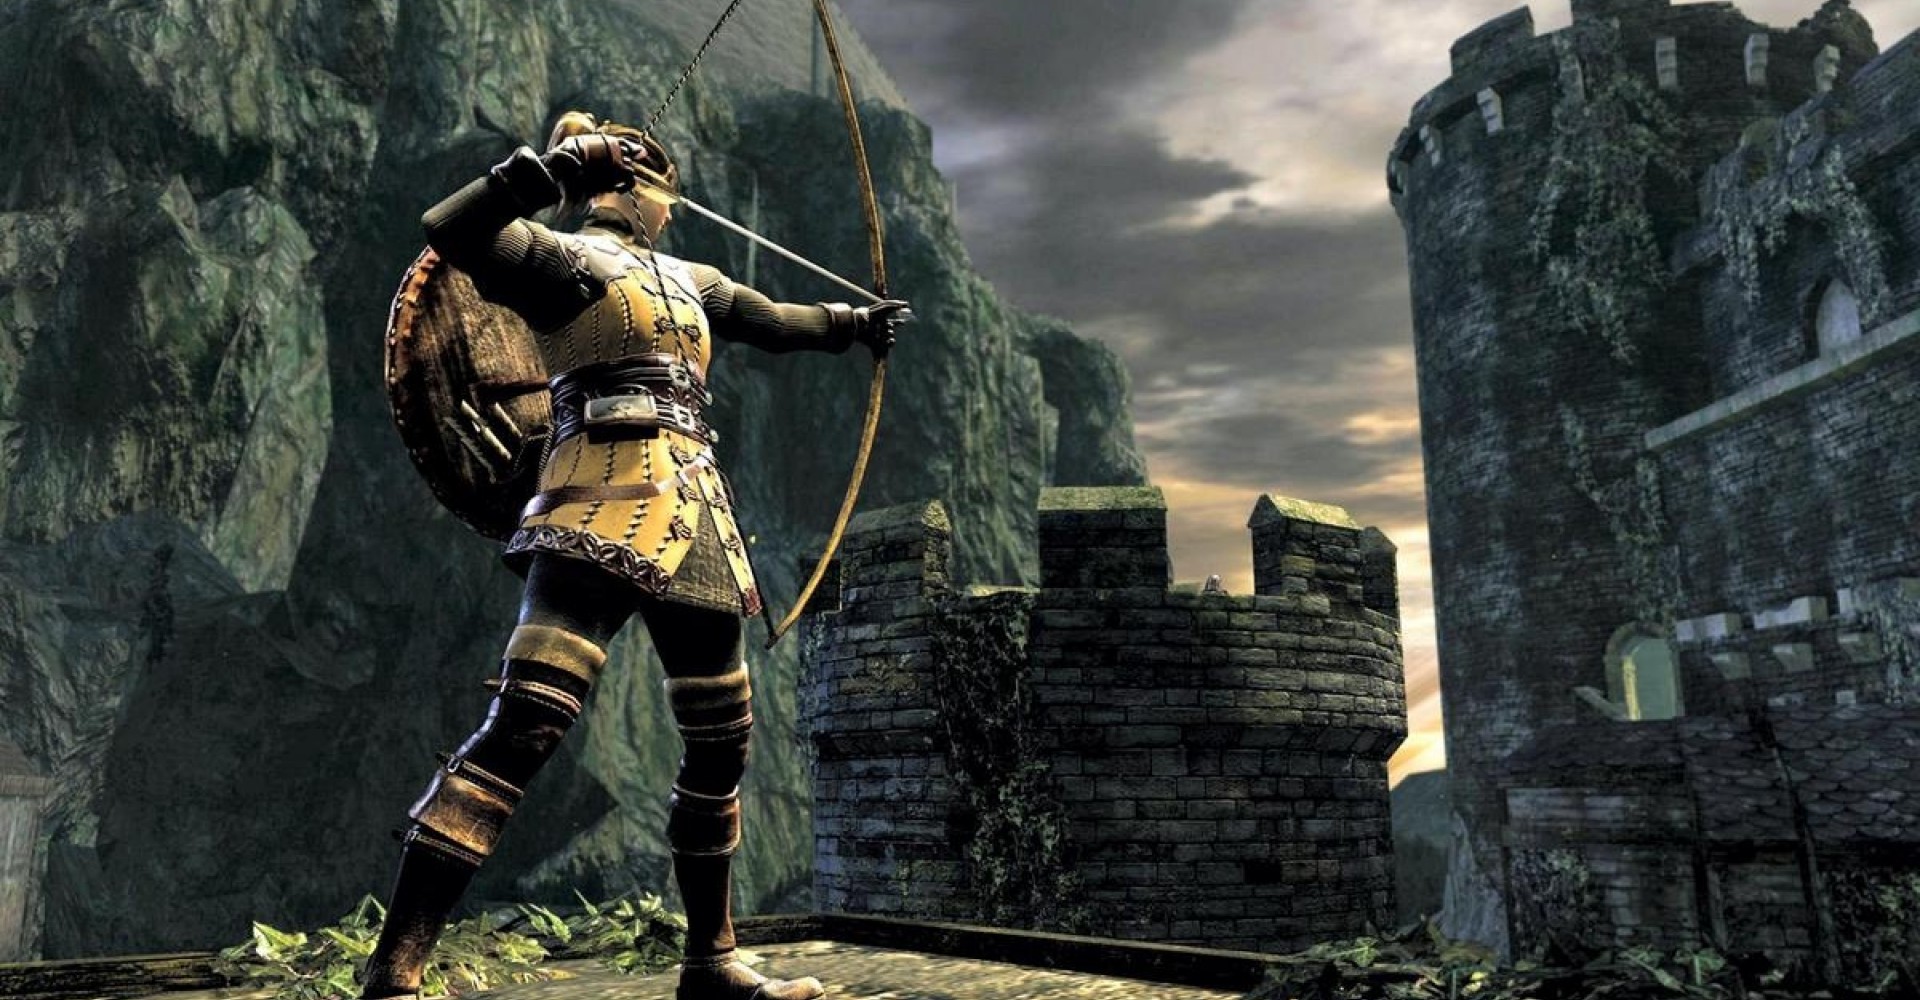 Dark Souls 2 now playable in first-person with this mod